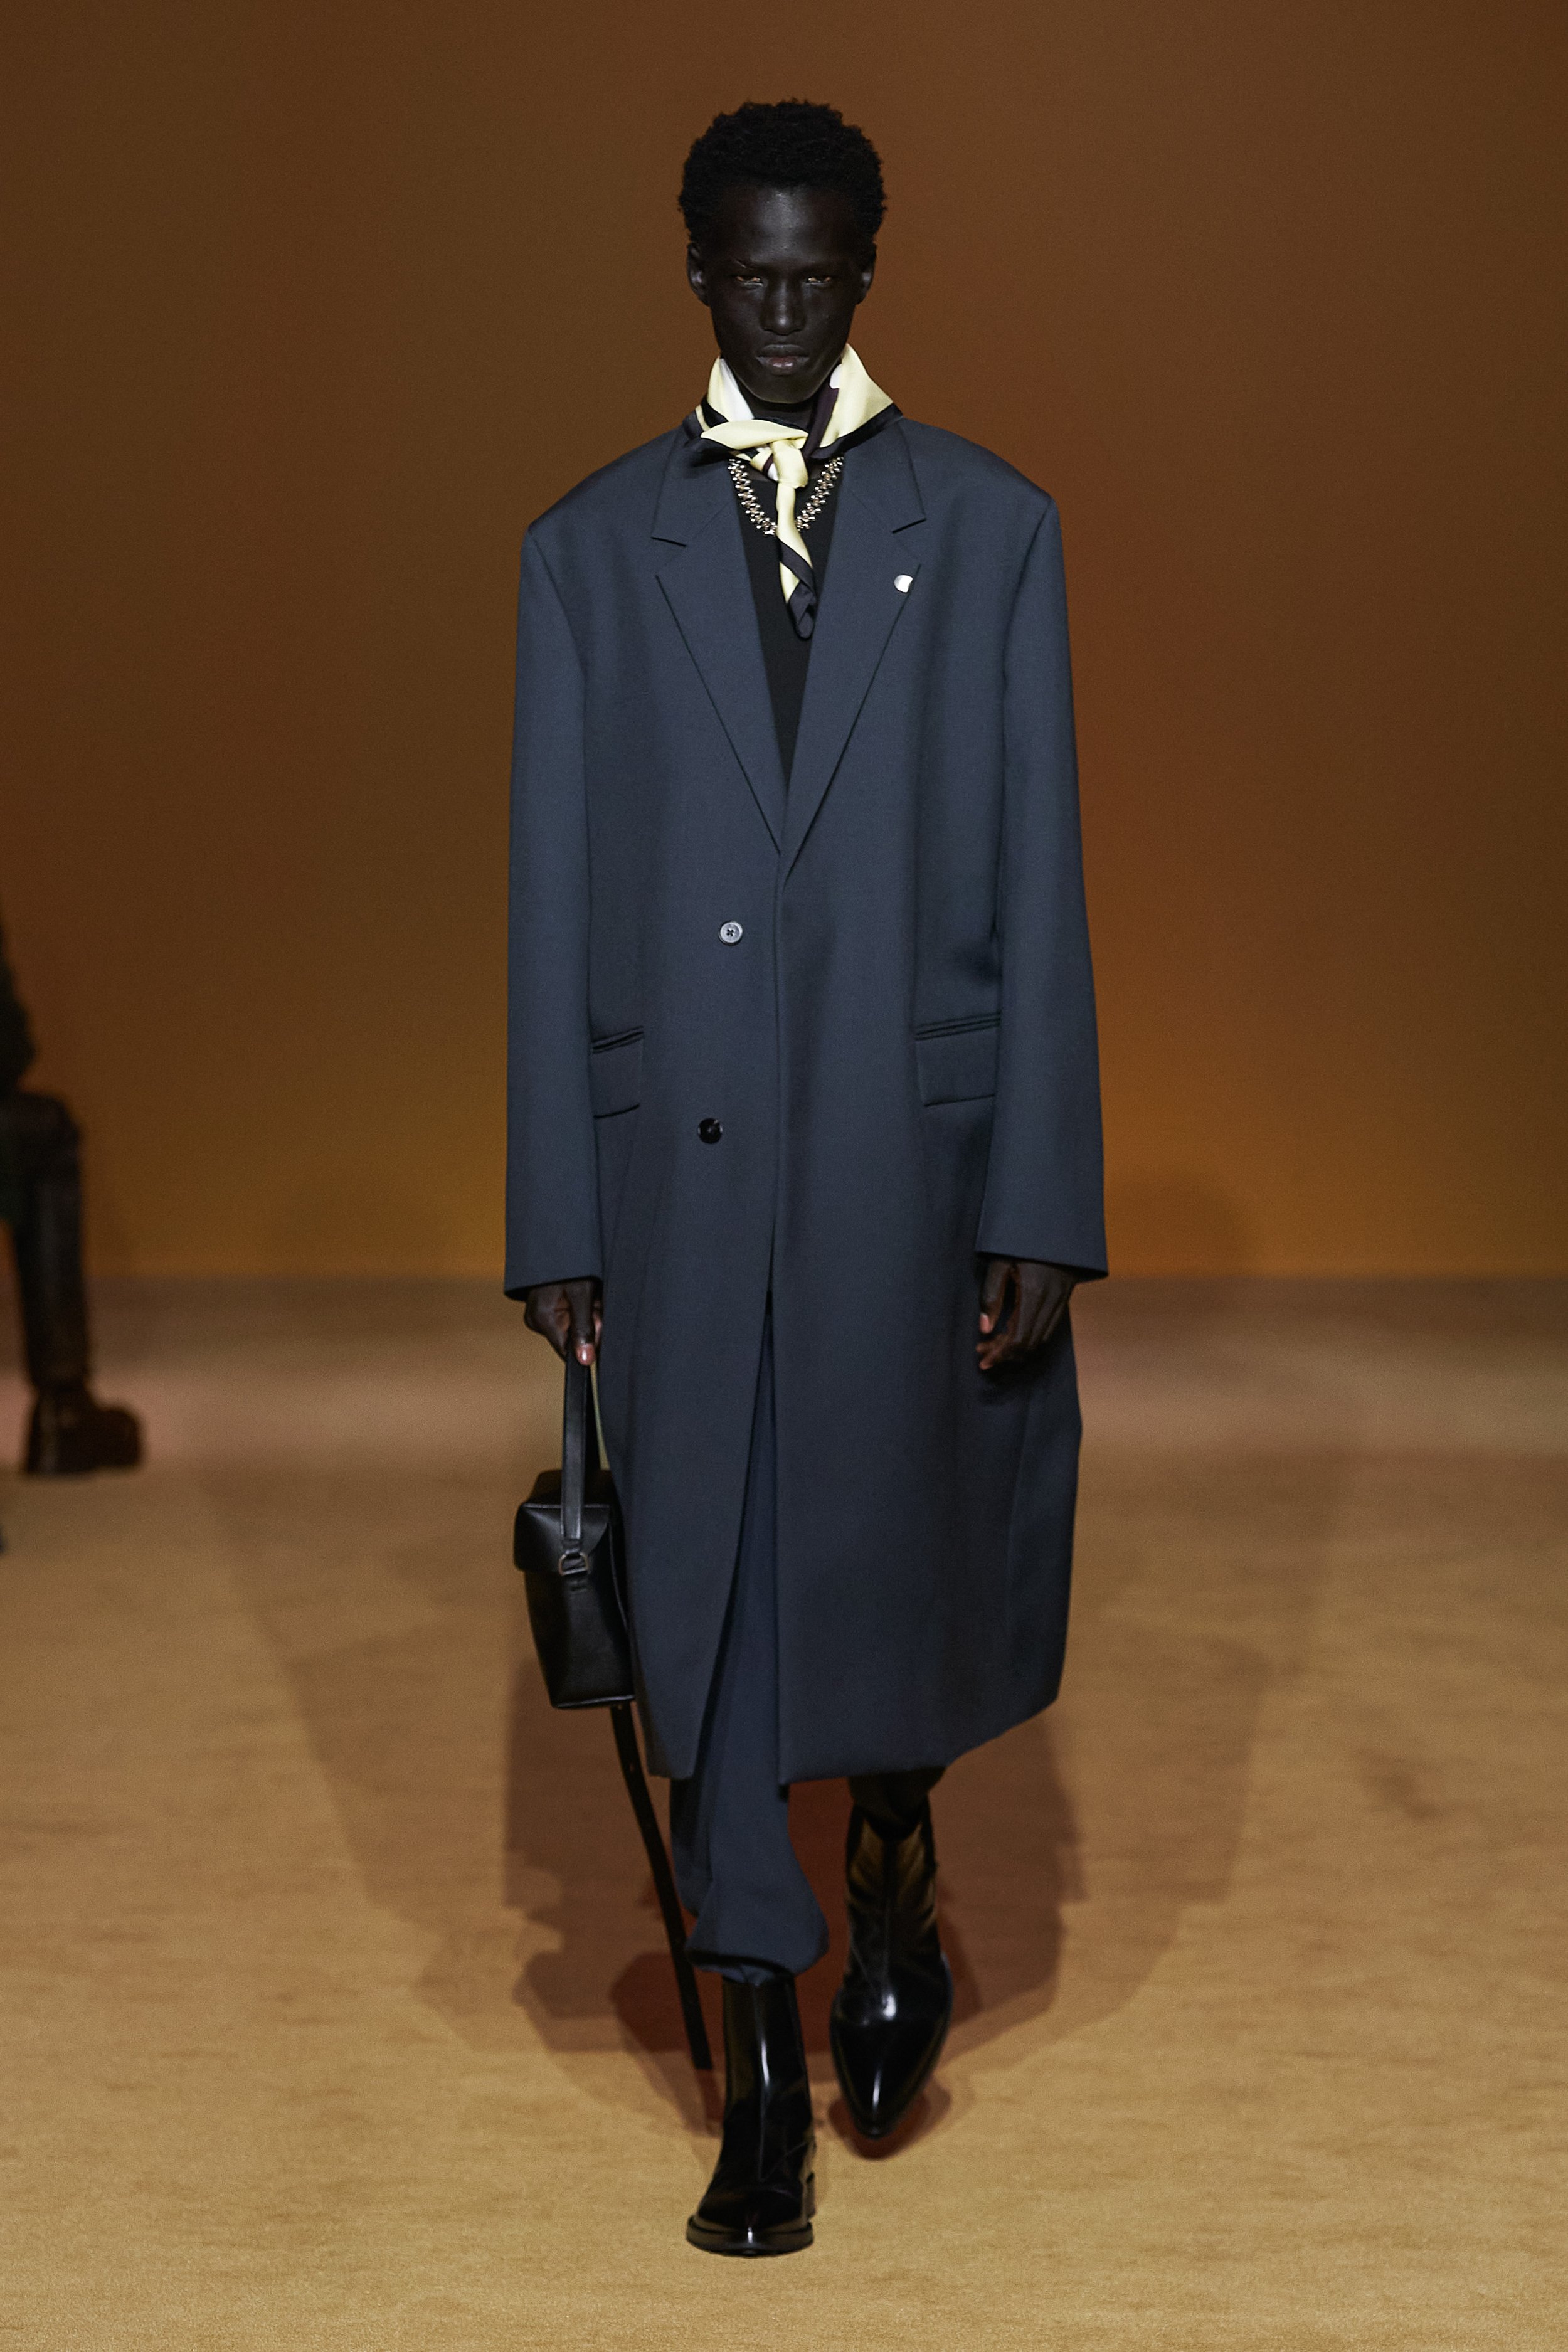 JIL SANDER FALL WINTER 2022 MENS COLLECTION, A CRAFTED VERSATILE-YET-MINIMALIST TEMPLATE